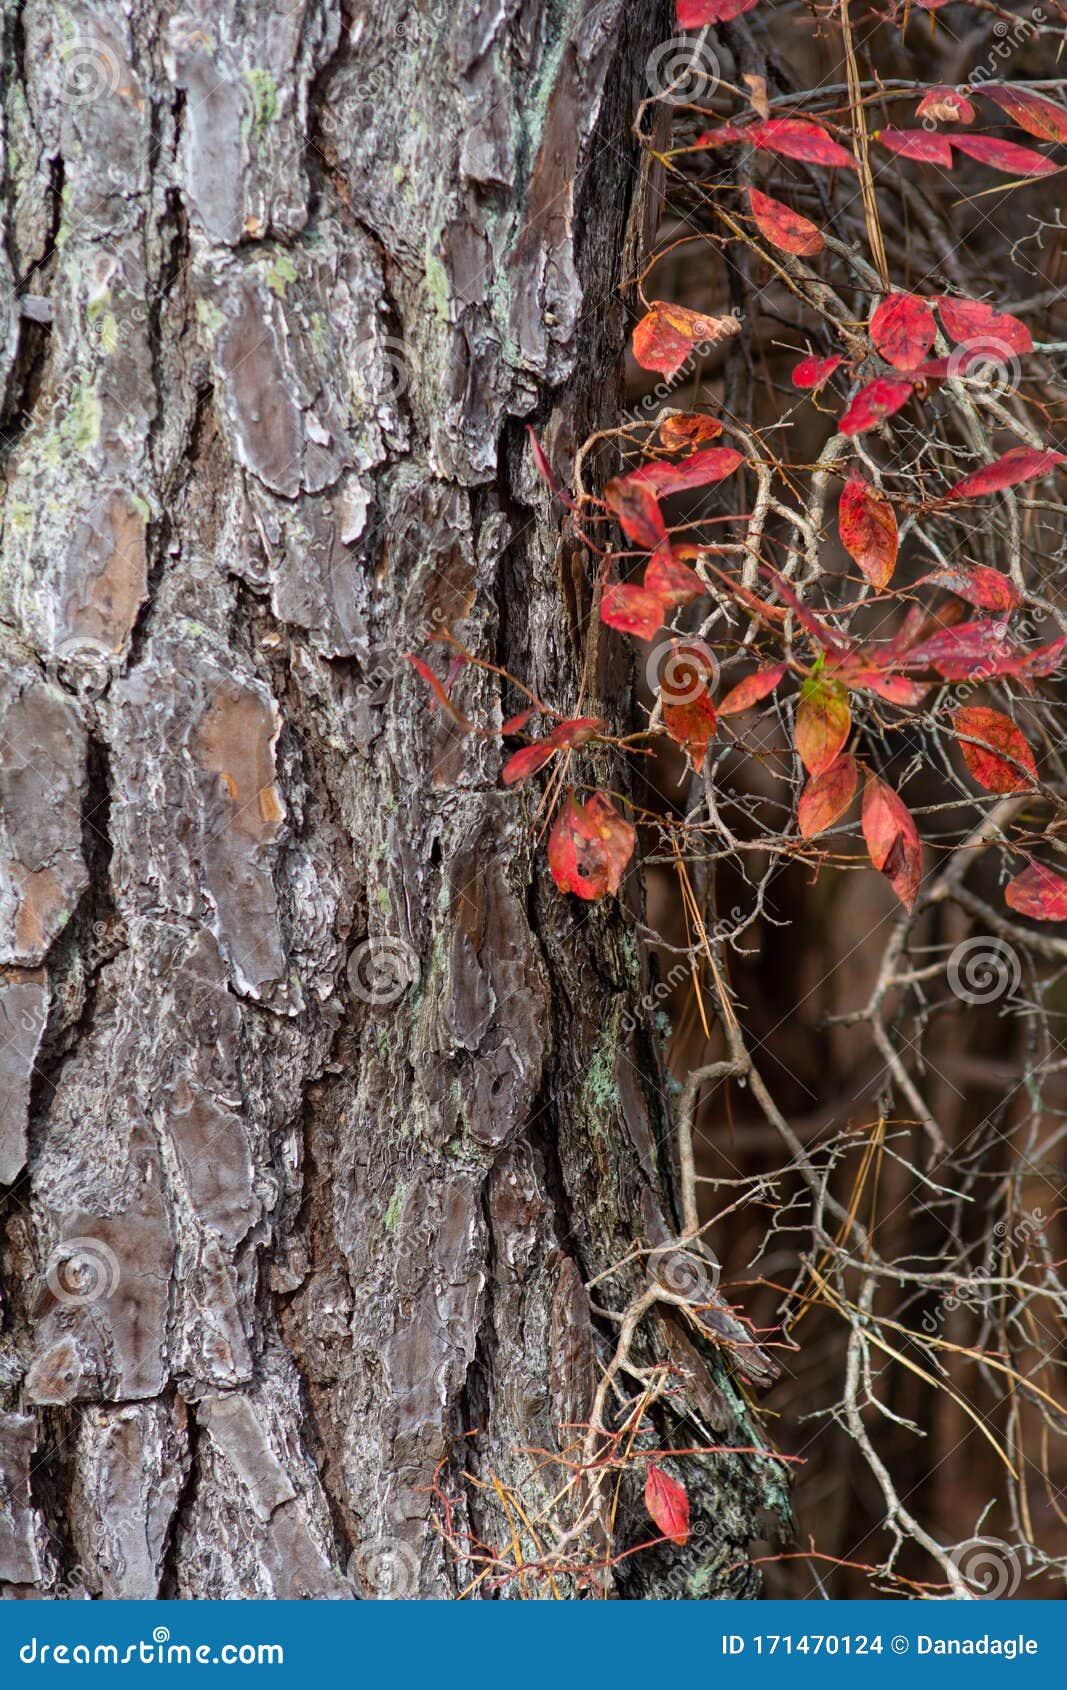 scenic landscape pinus taeda tree trunk bark detail in forest woodland with bright red leaves on vine